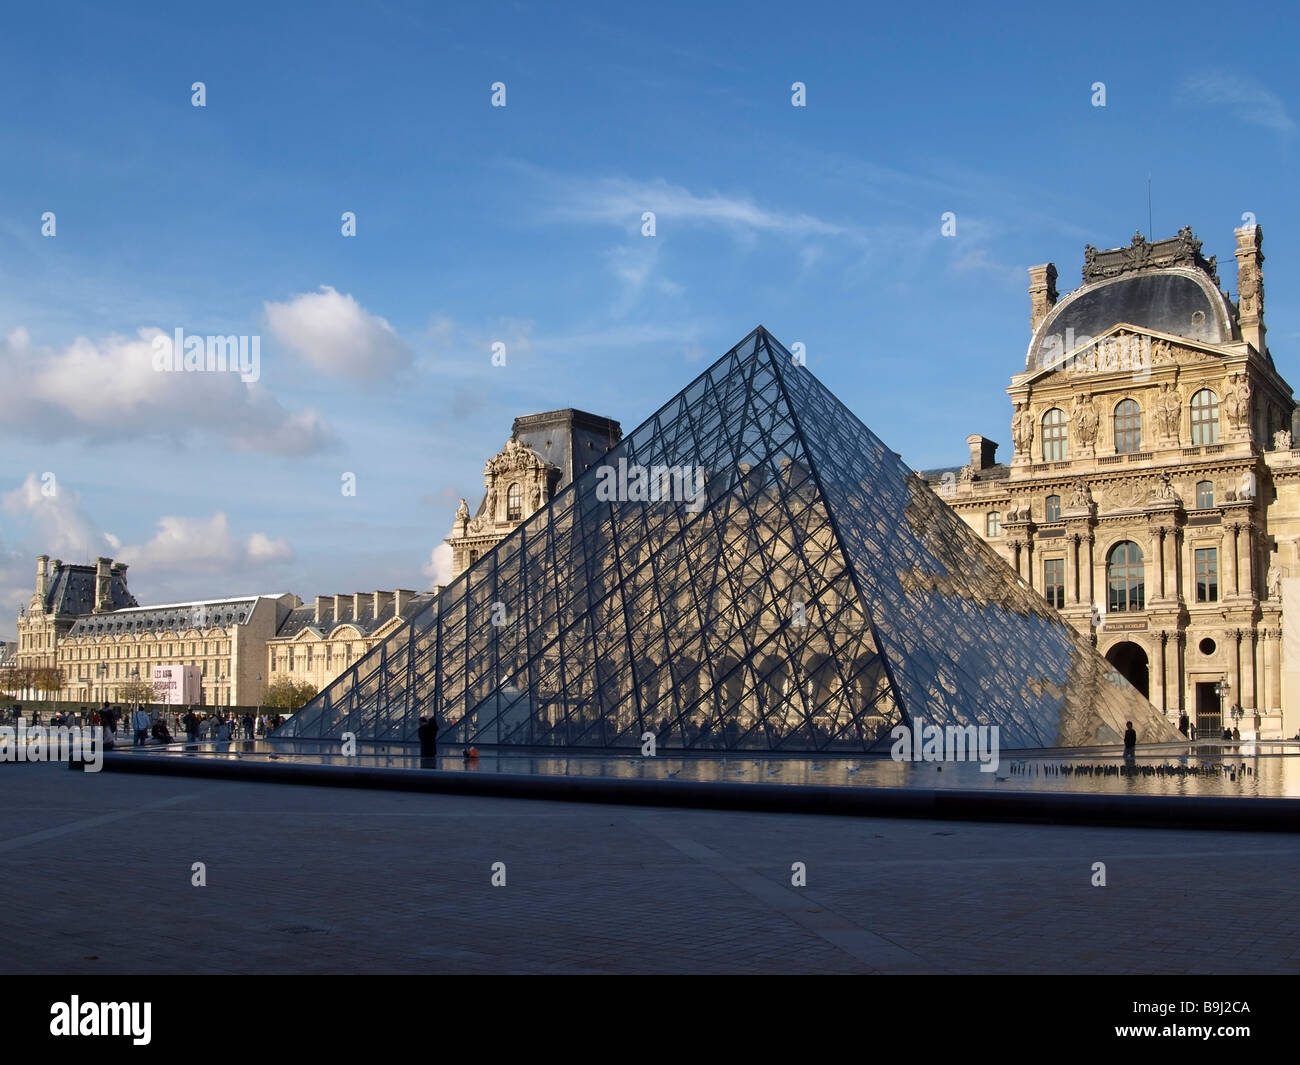 Inner courtyard of the Louvre with pyramid, Paris, France, Europe Stock Photo